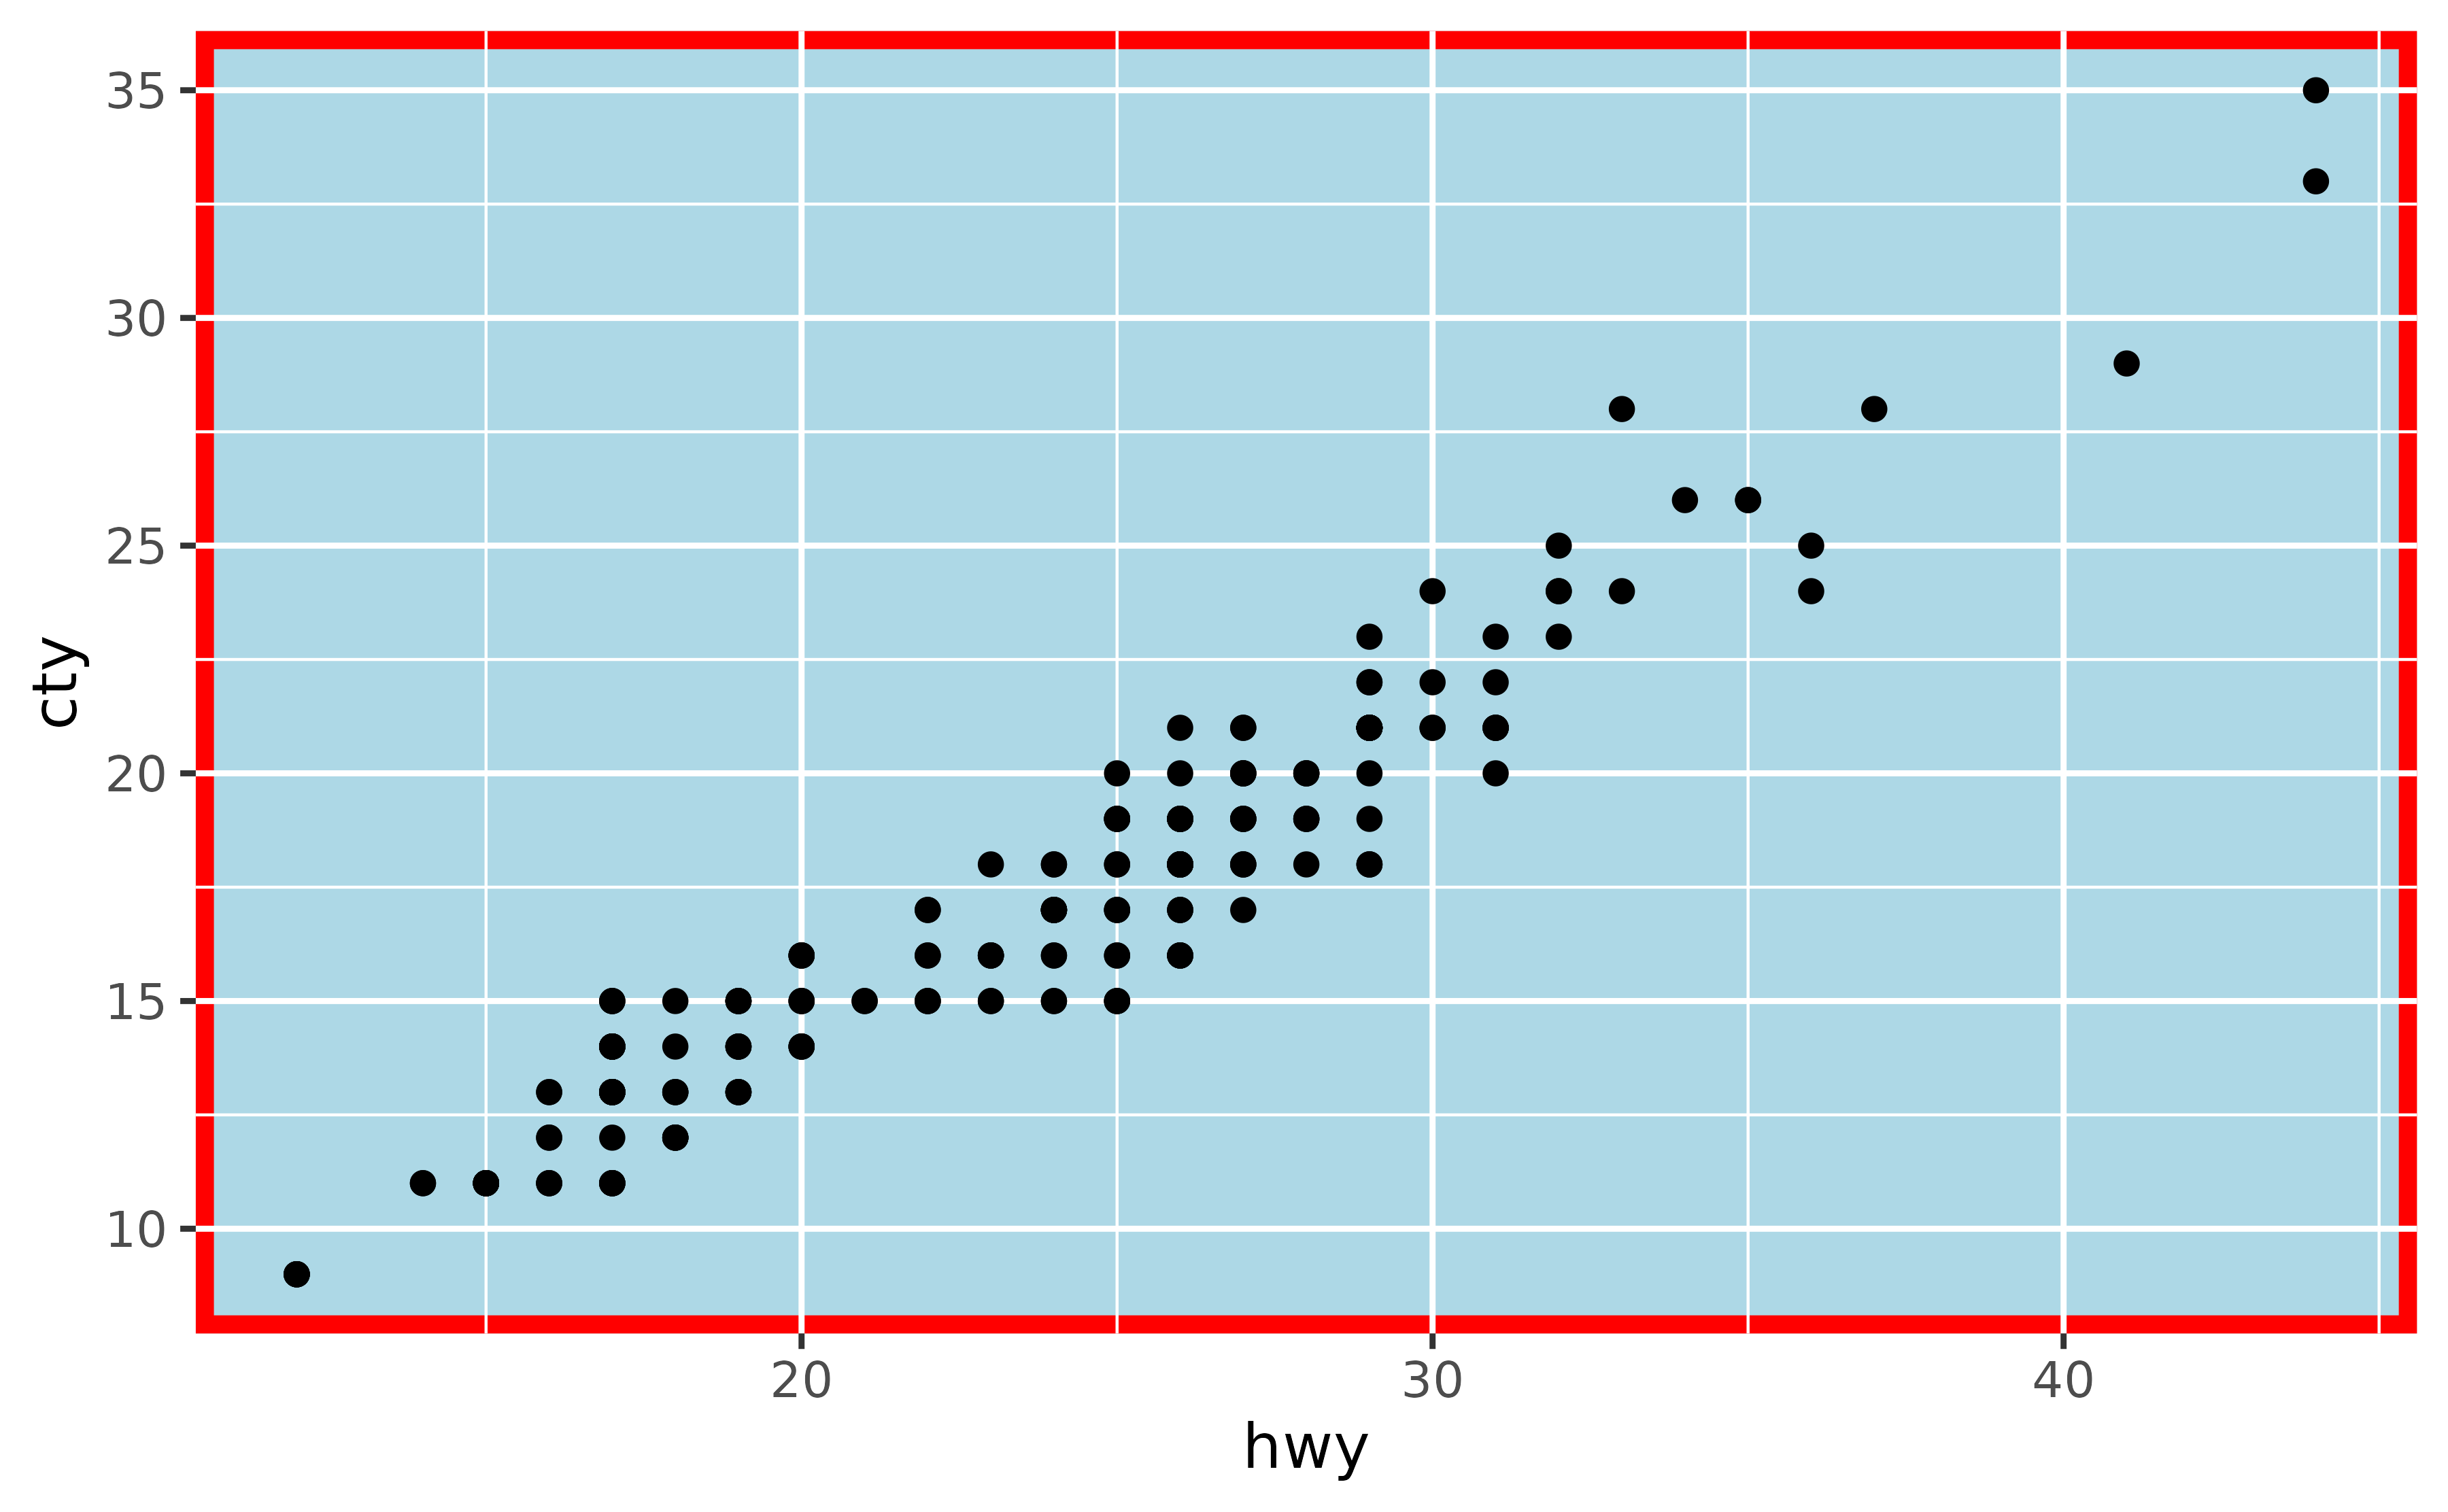 A scatter plot showing the highway miles per gallon on the x-axis and city miles per gallon on the y-axis. The panel background of the plot is light blue and is outlined in red with a thick stroke.